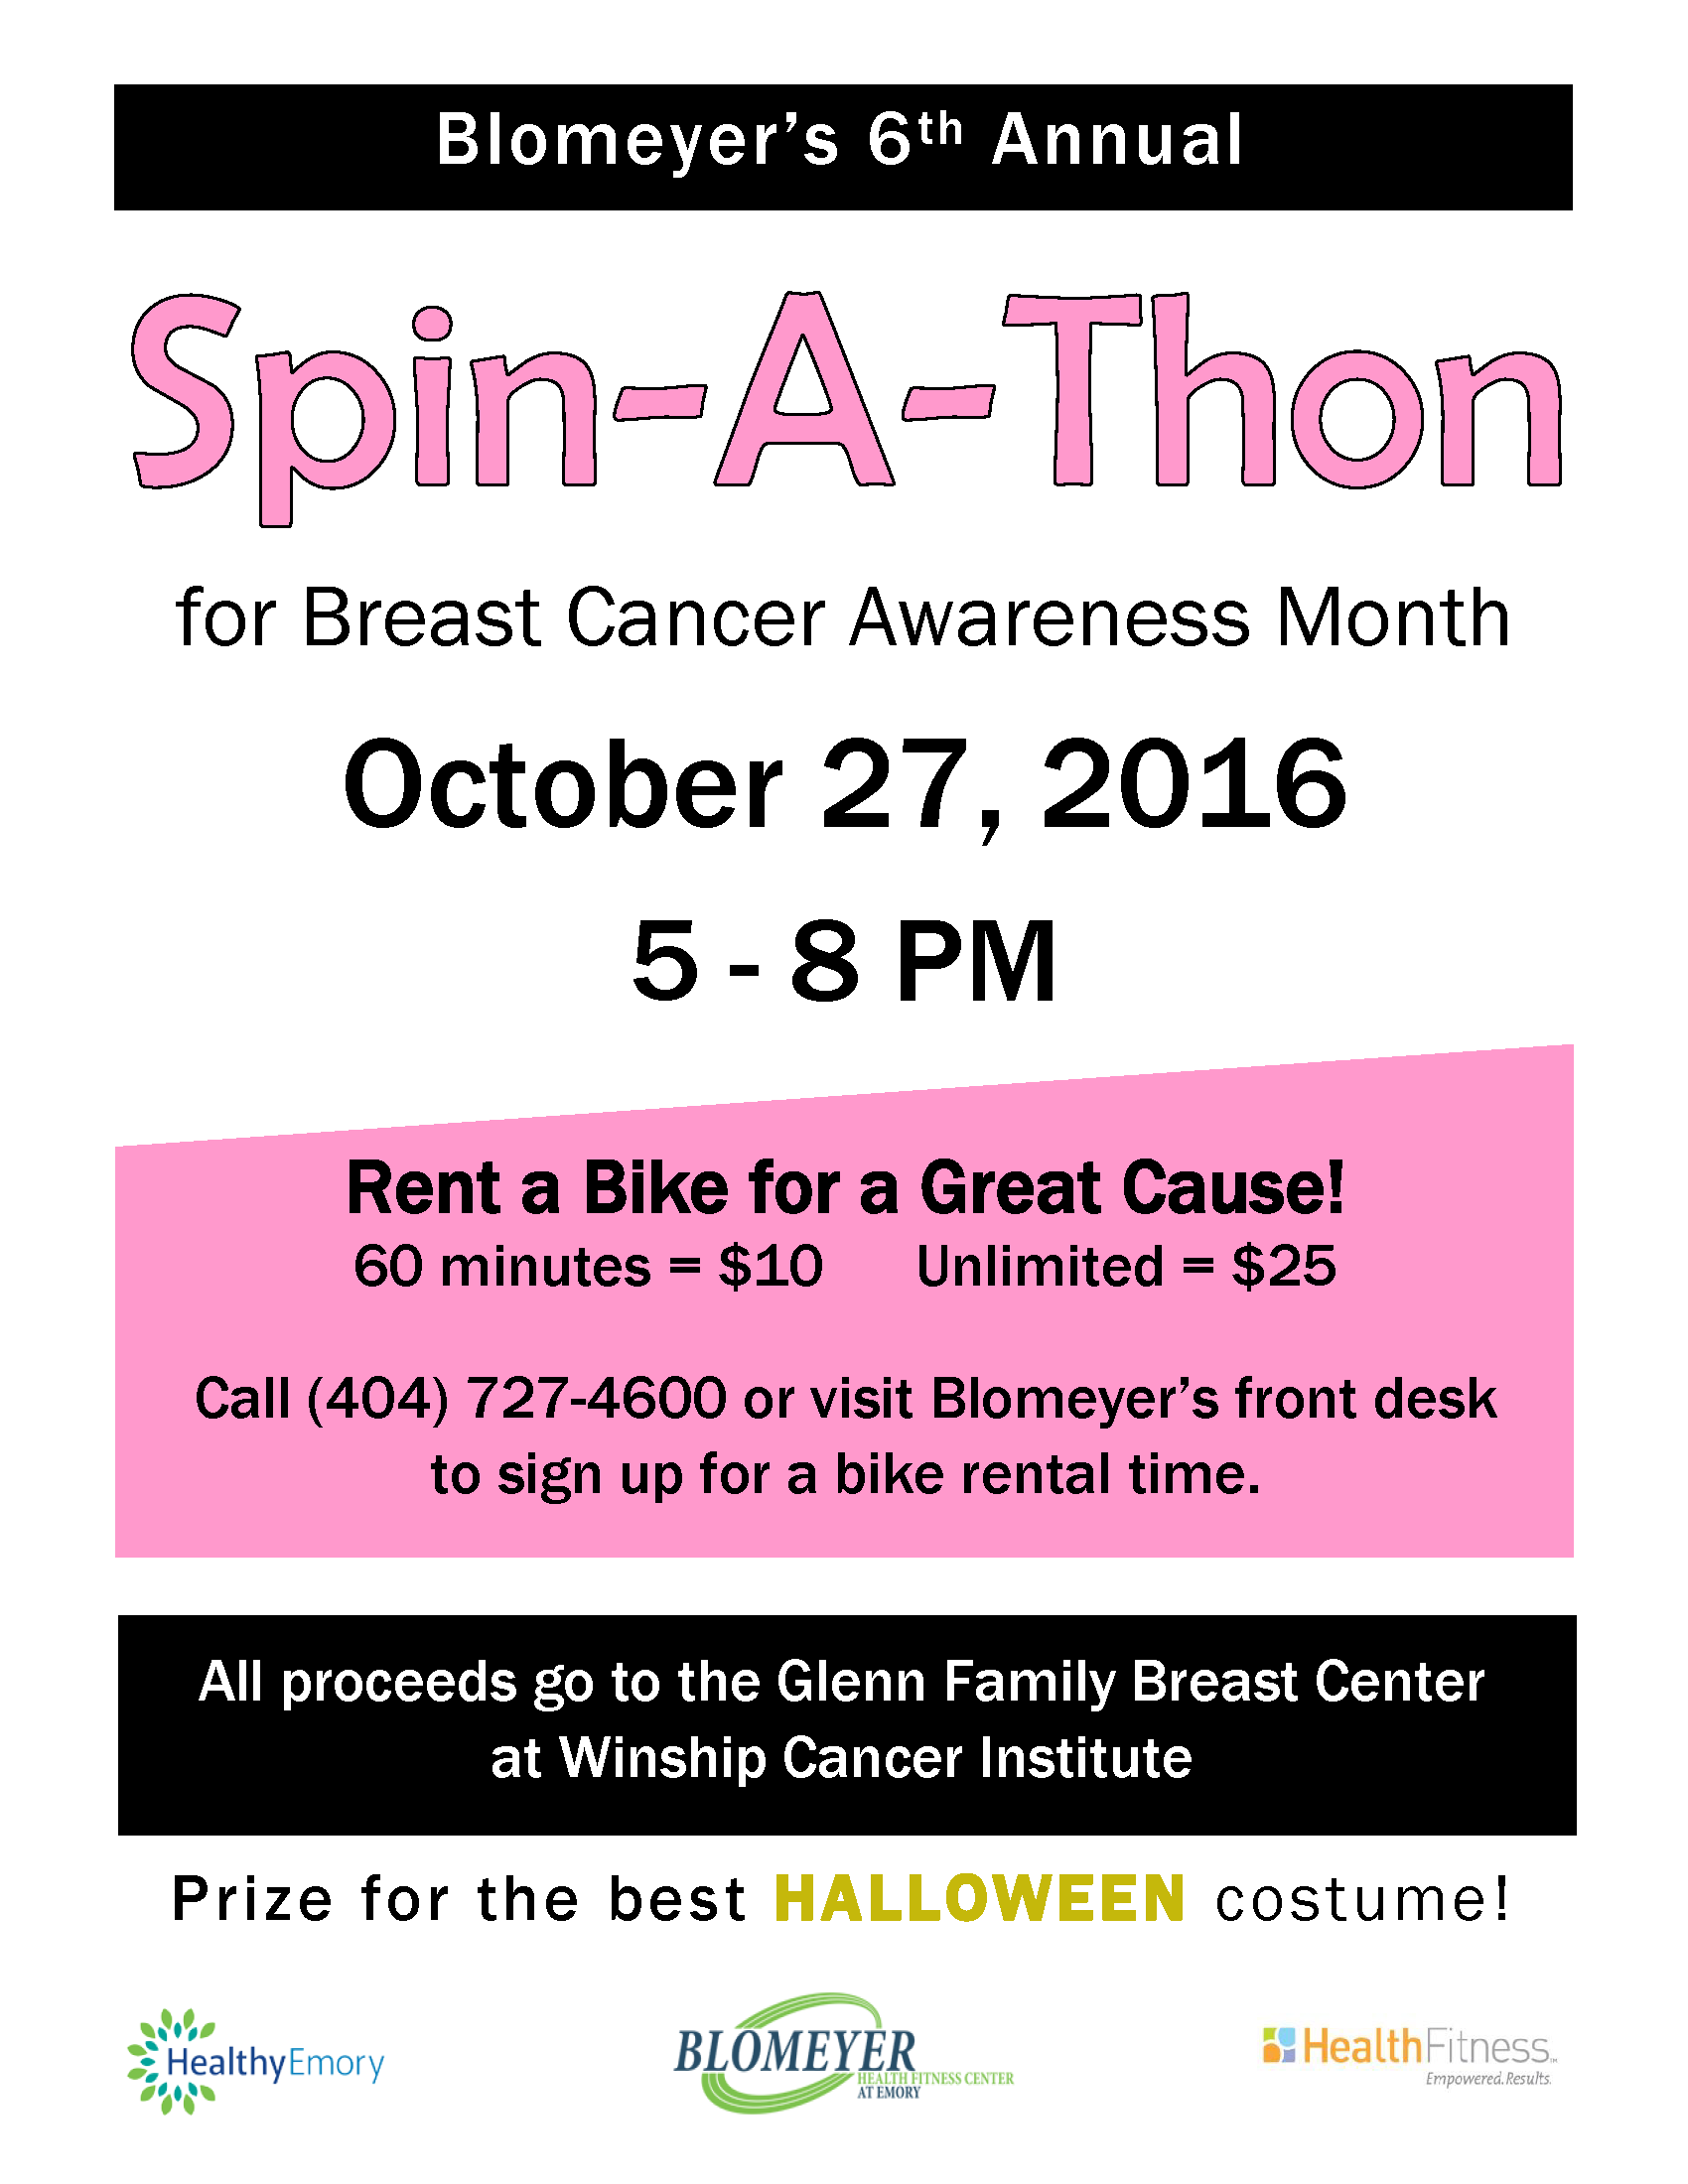 Spin-a-thon flyer